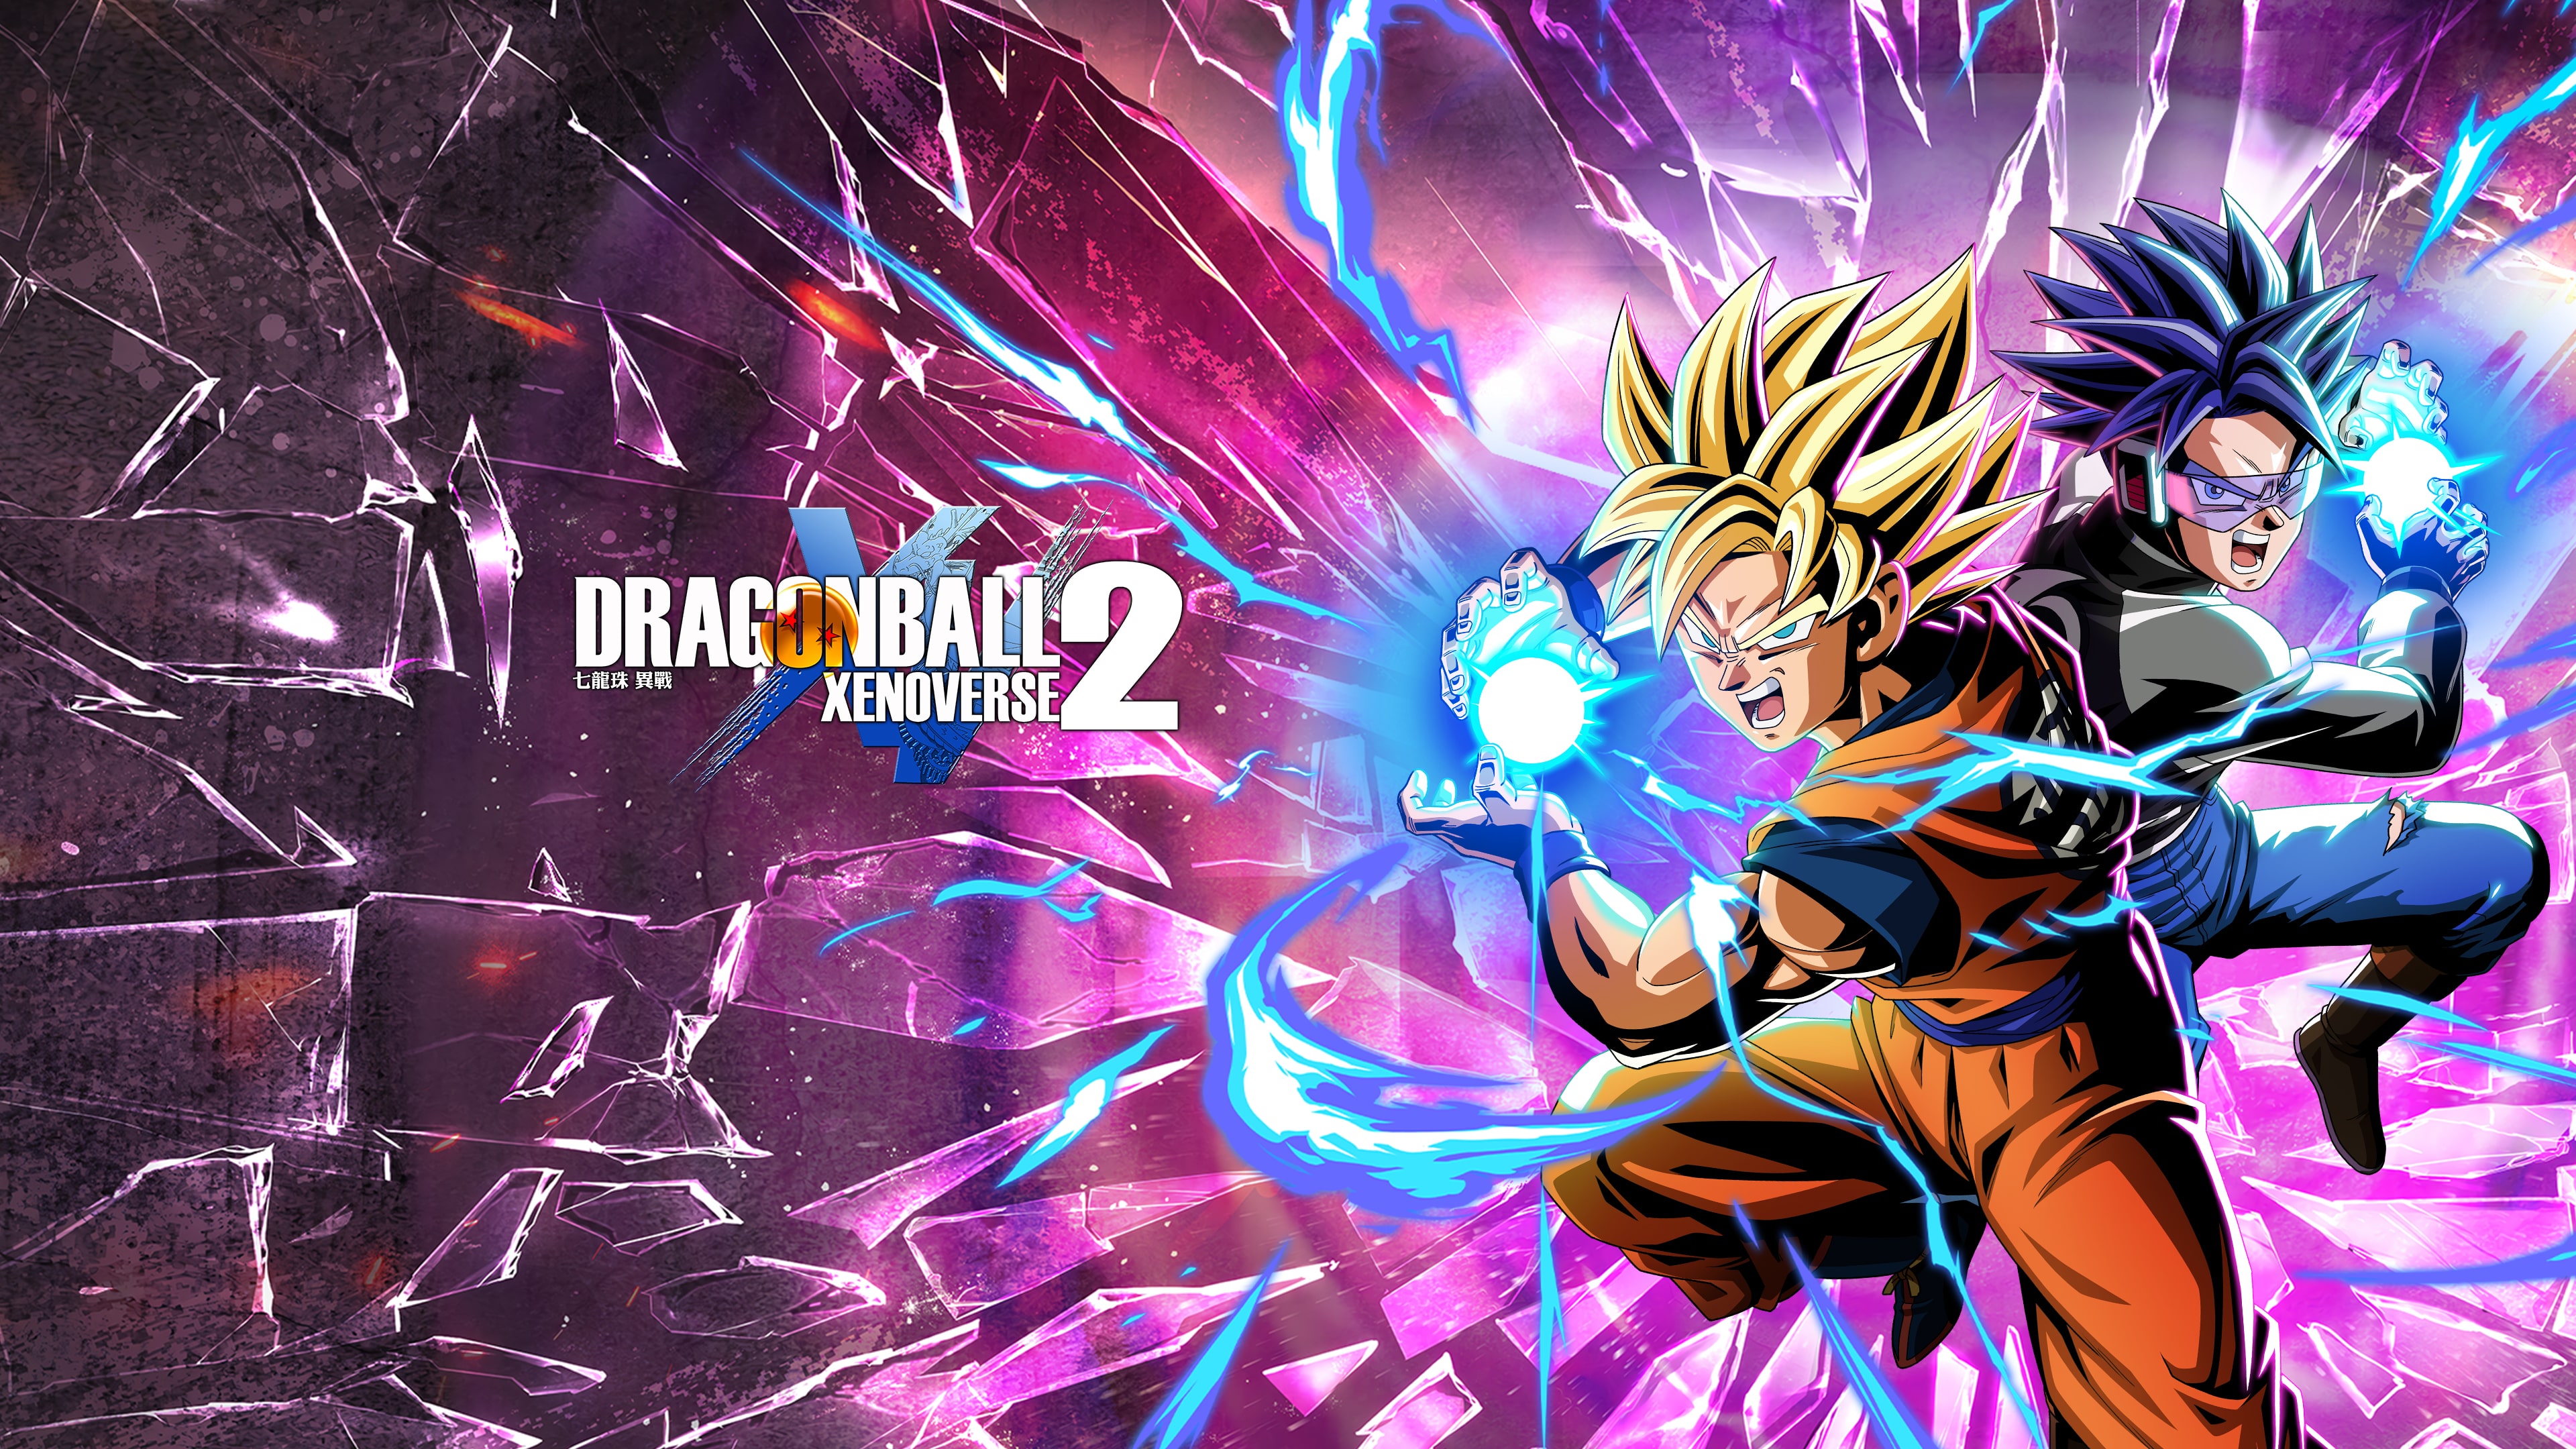 DRAGON BALL XENOVERSE 2 (Simplified Chinese, Korean, Japanese, Traditional Chinese)